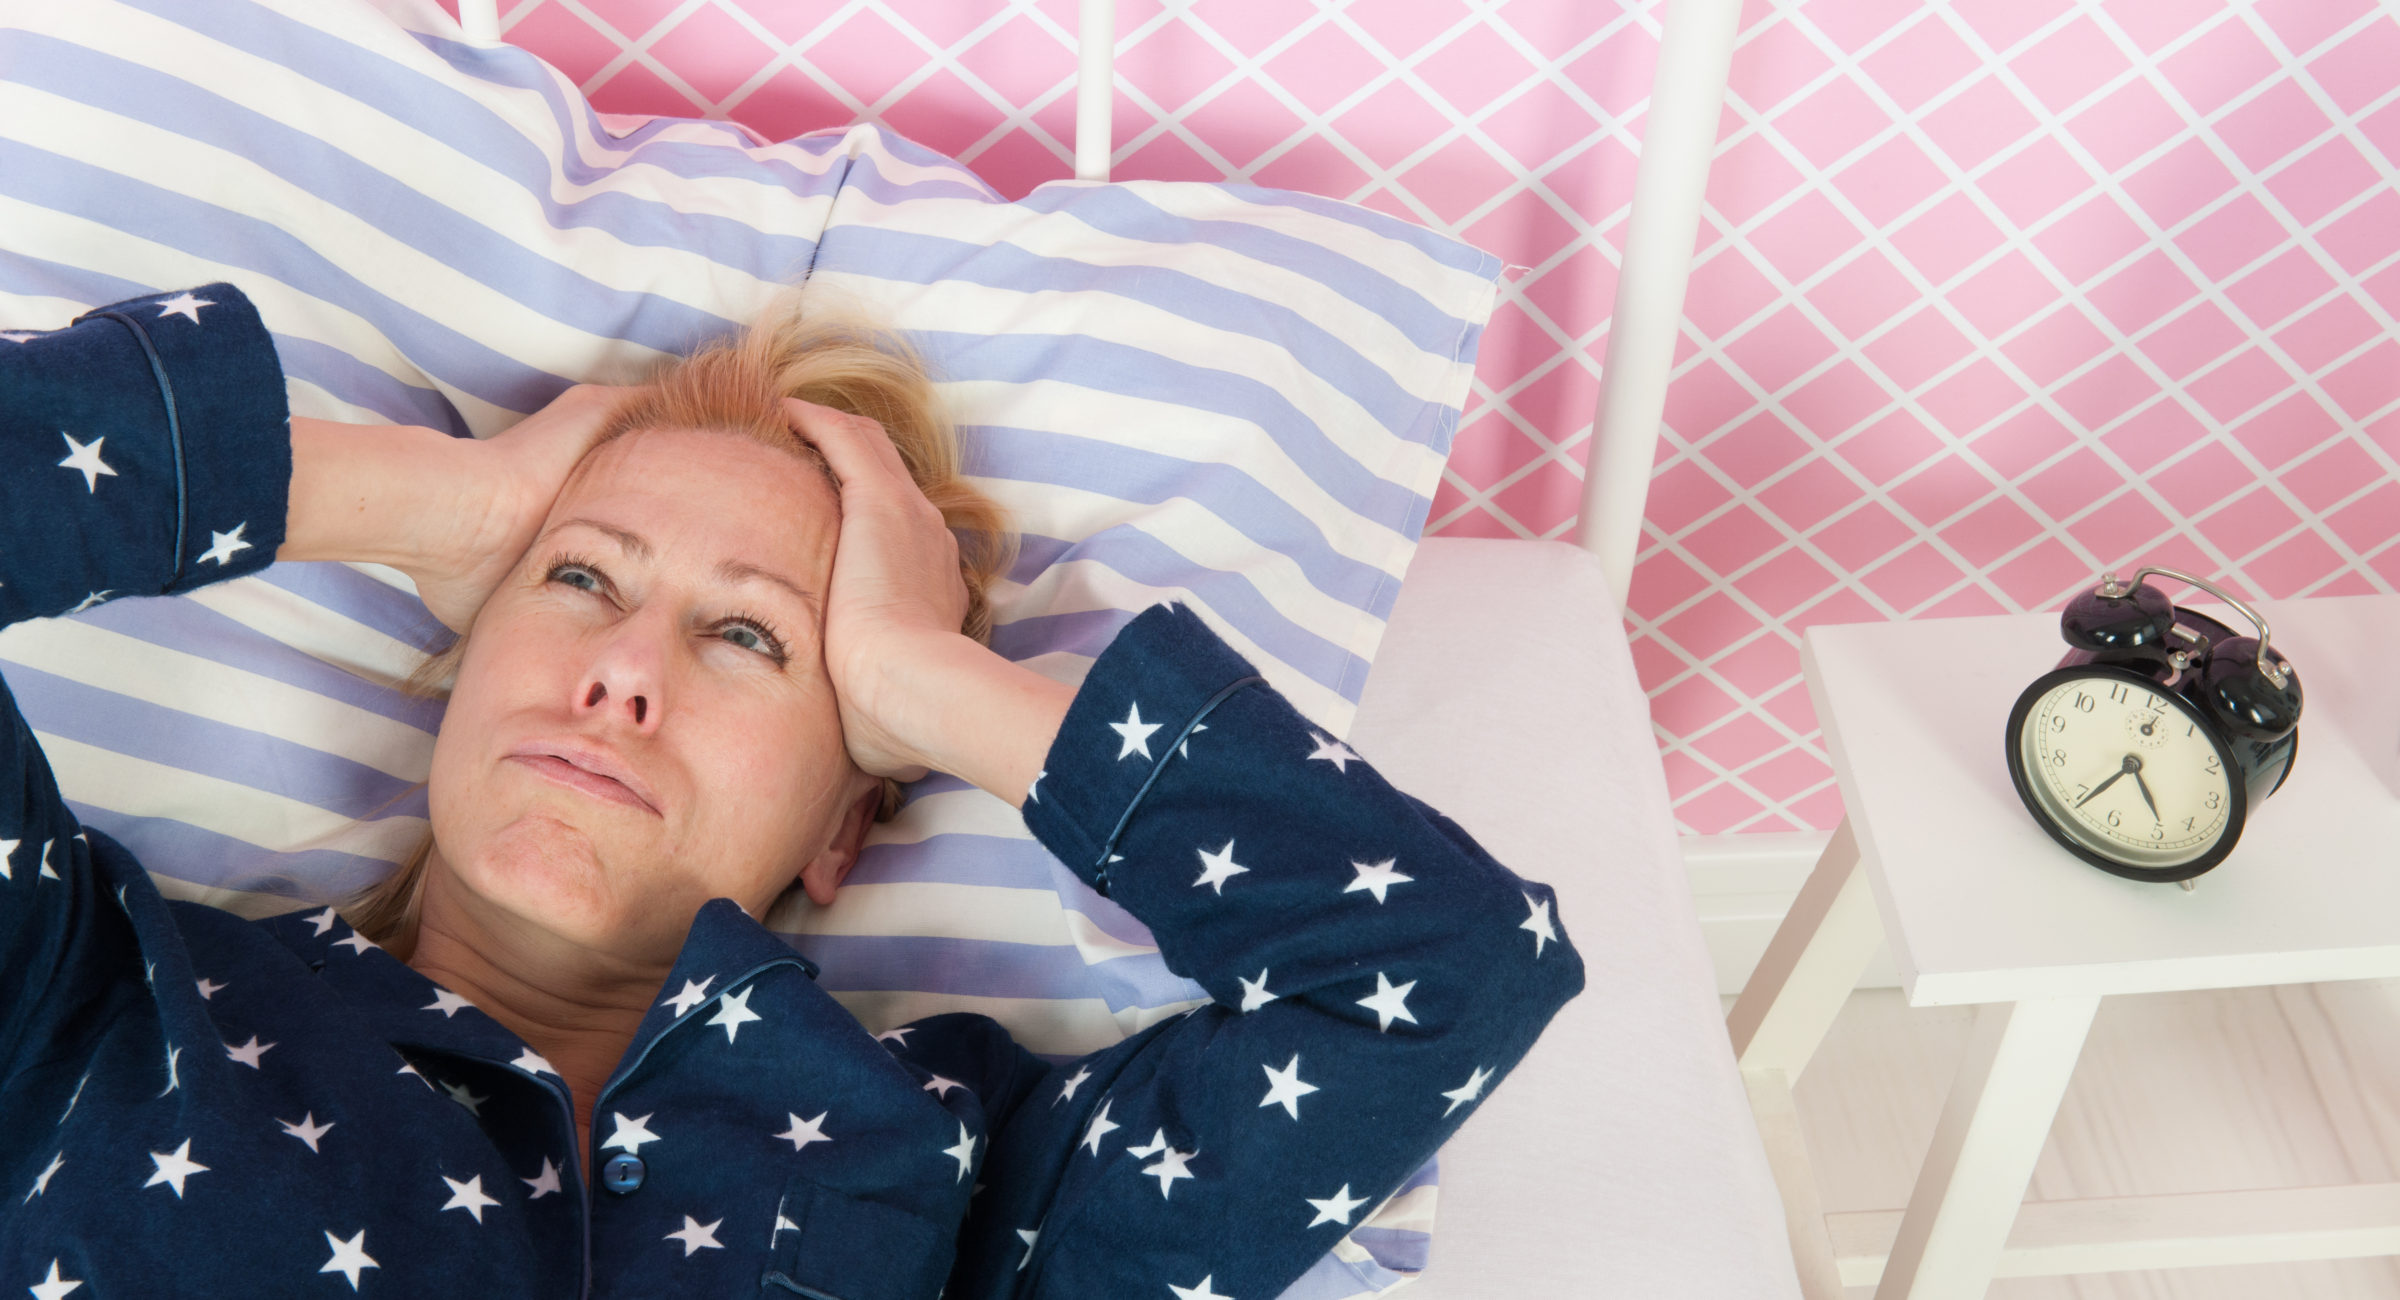 Blond woman of mature age with insomnia